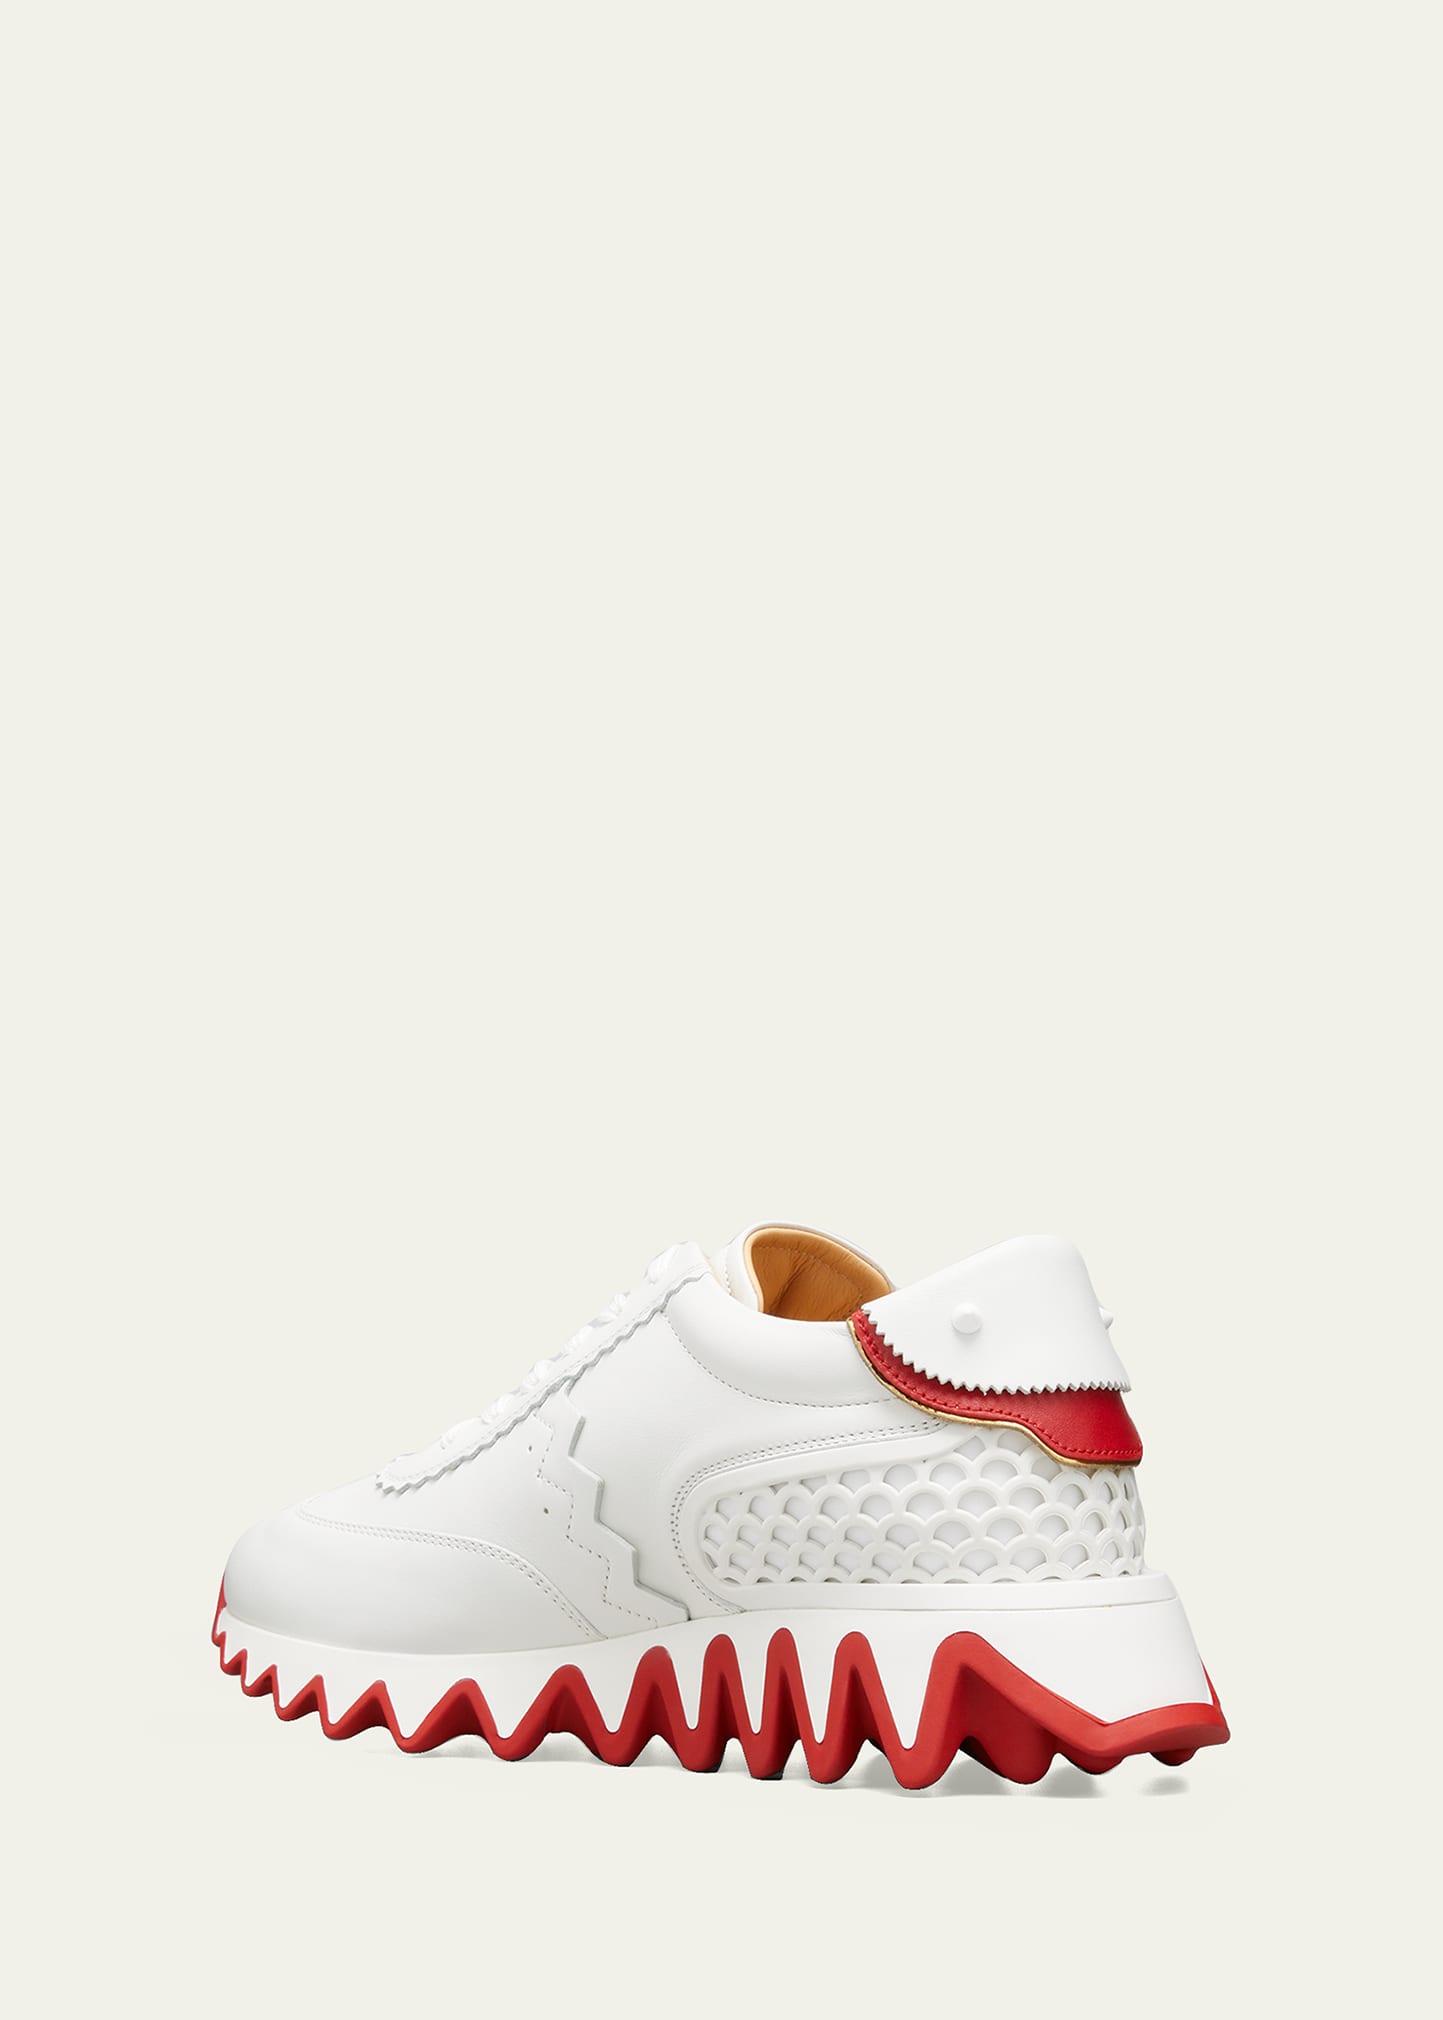 Christian Louboutin Loubishark Donna Leather Red Sole Runner